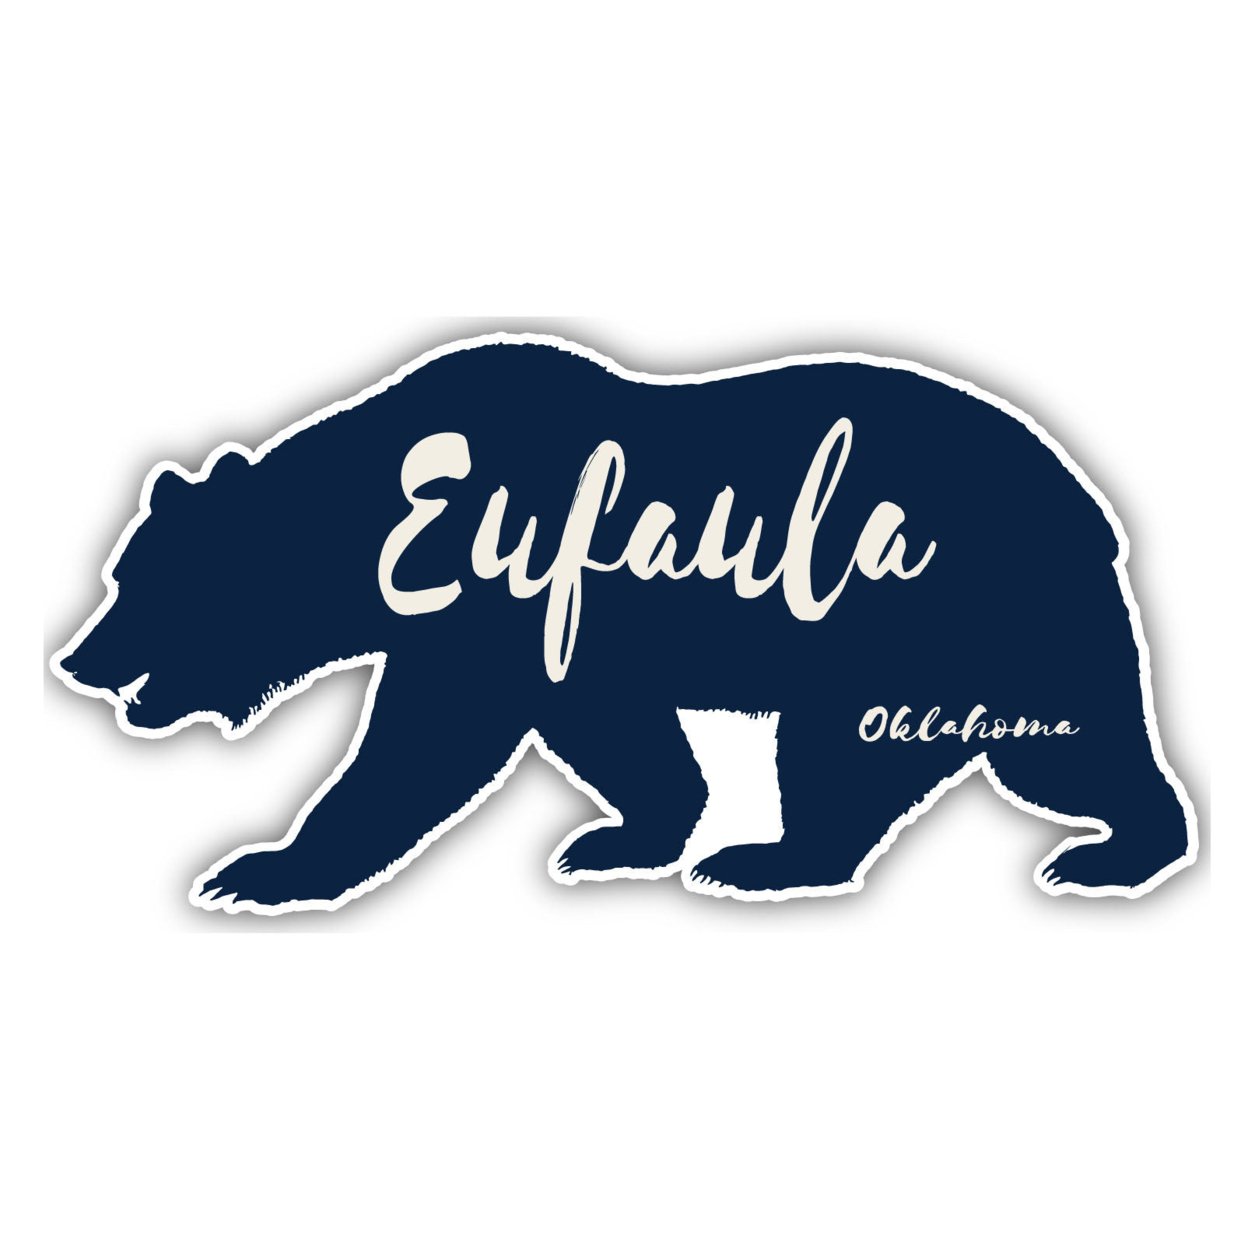 Eufaula Oklahoma Souvenir Decorative Stickers (Choose Theme And Size) - 4-Pack, 4-Inch, Tent